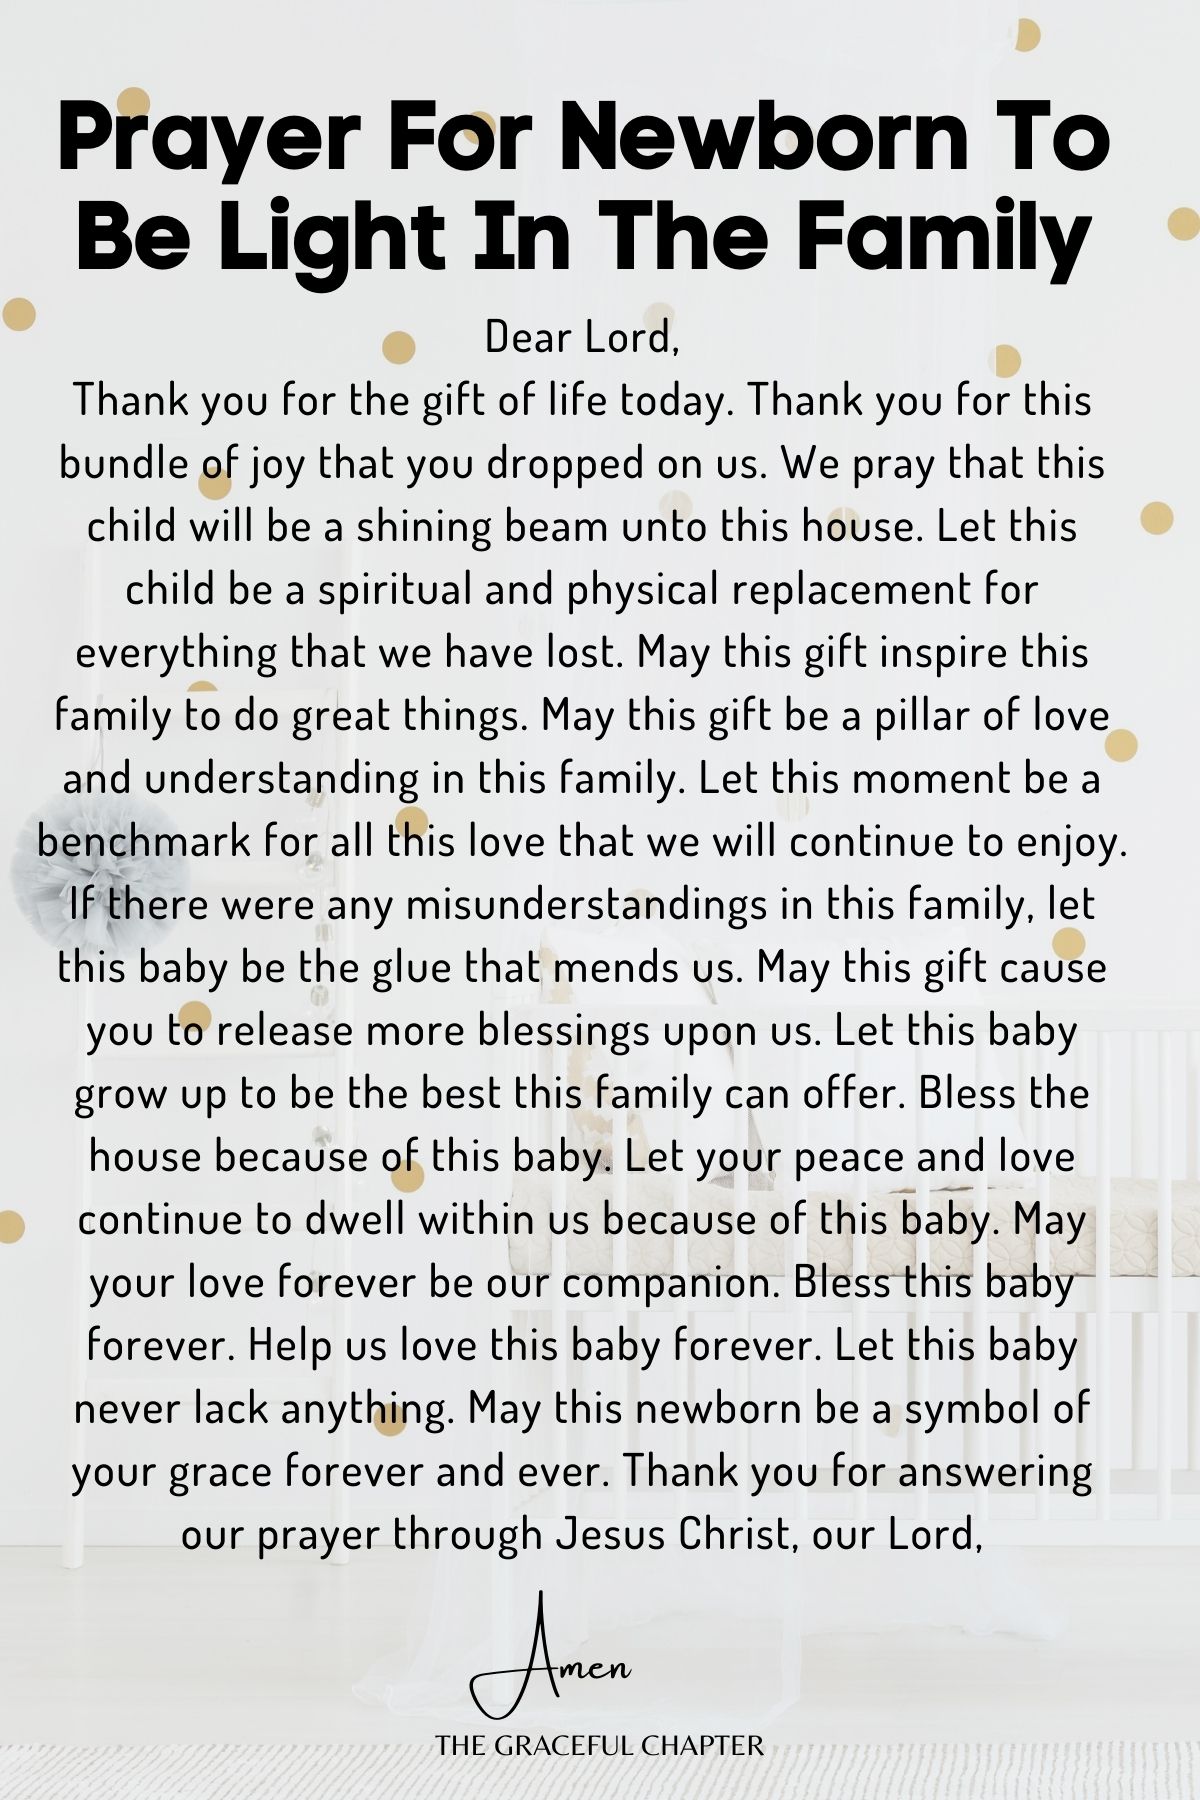 Prayer for newborn to be light in the family